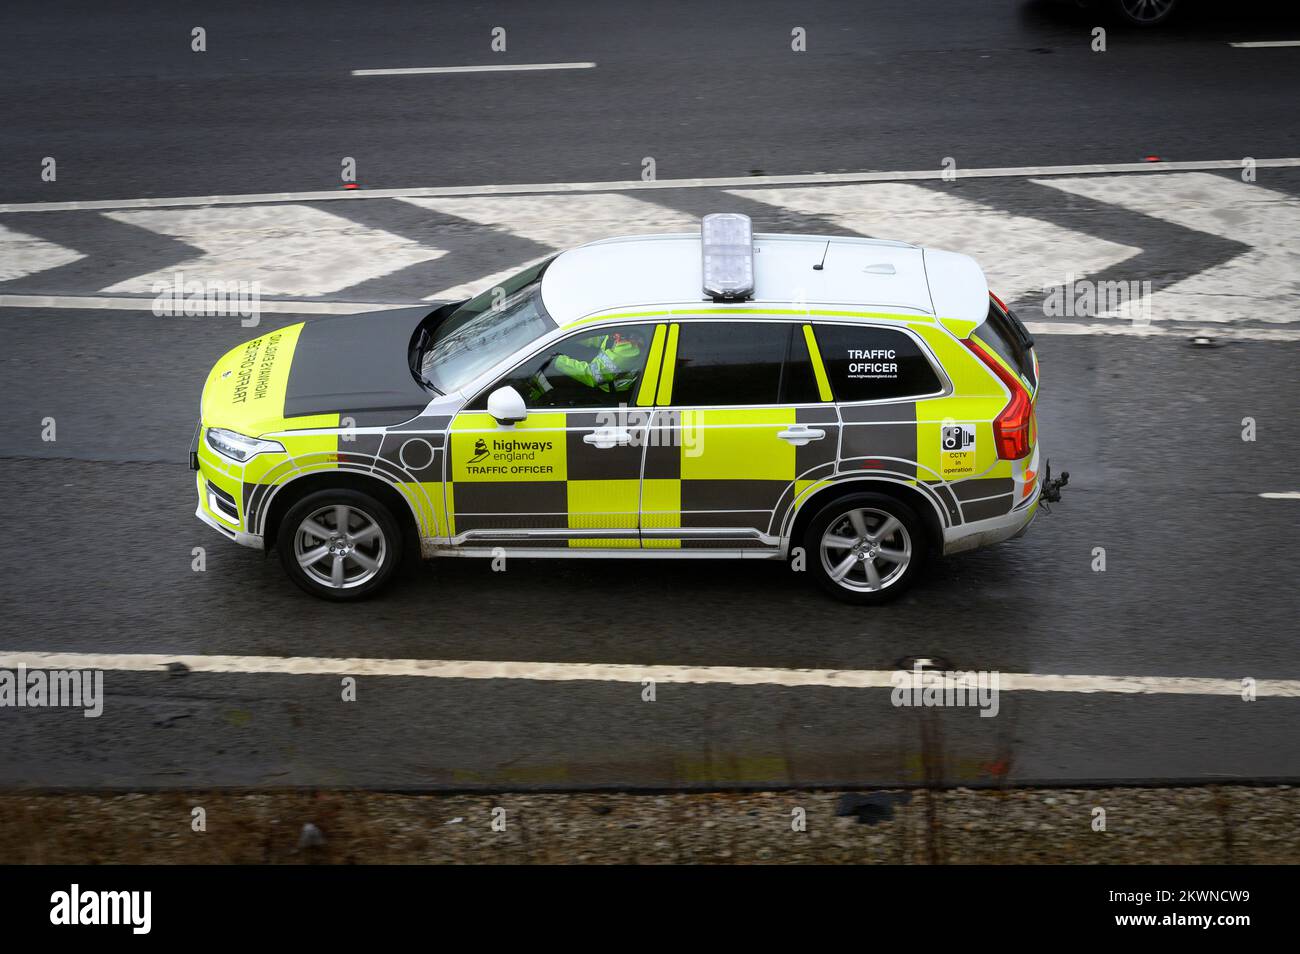 Highways England traffic officer on patrol in England. Stock Photo